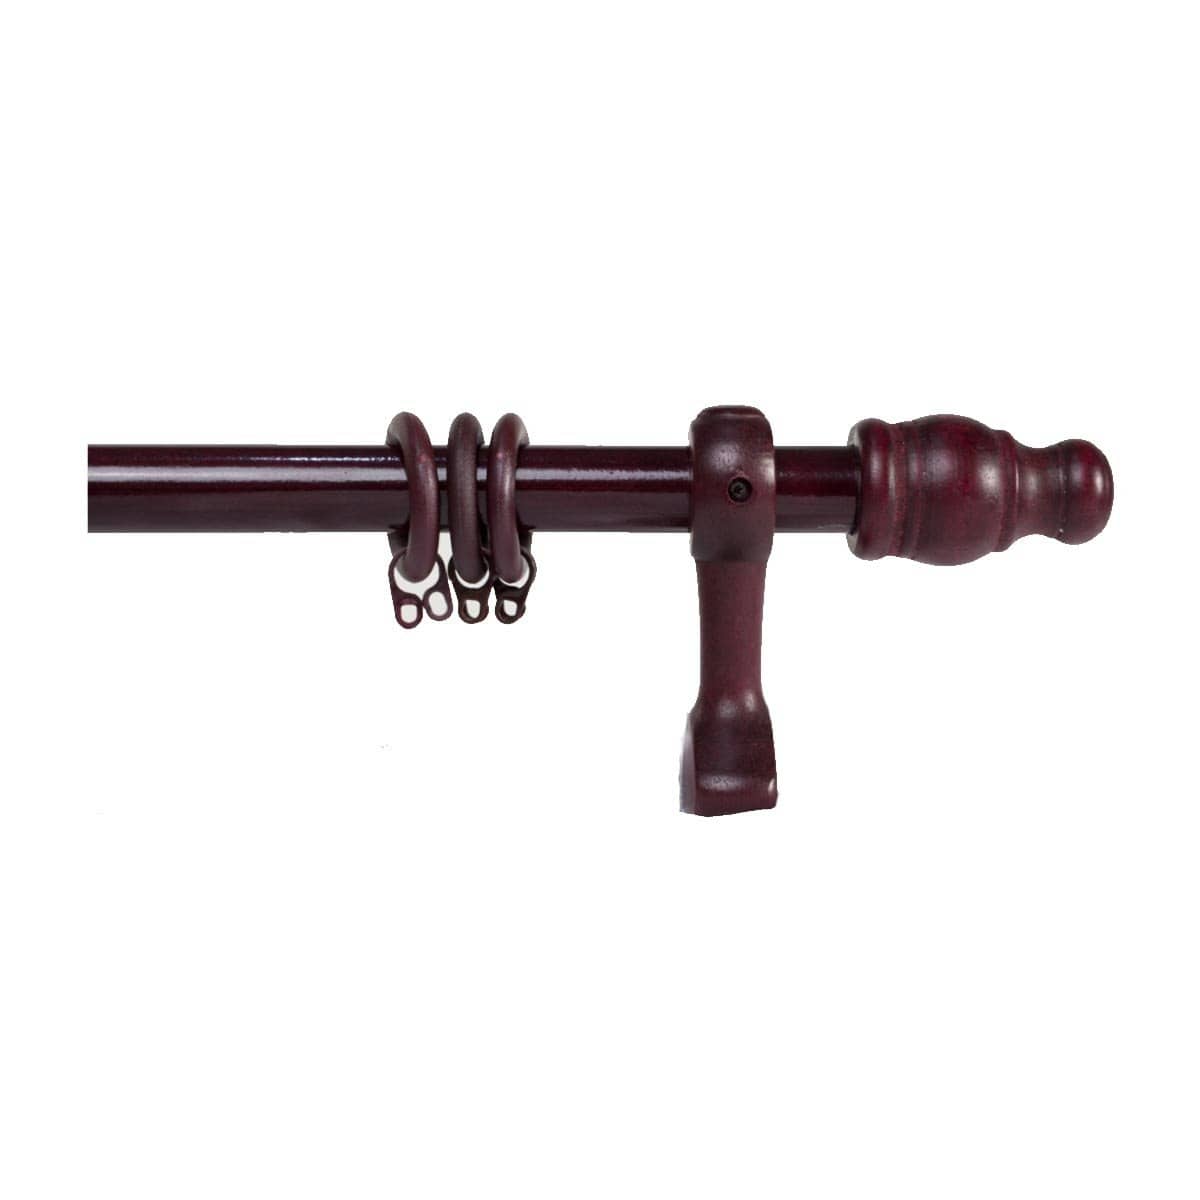 FWCR535 Wooden Curtain Rod 6' Rosewood